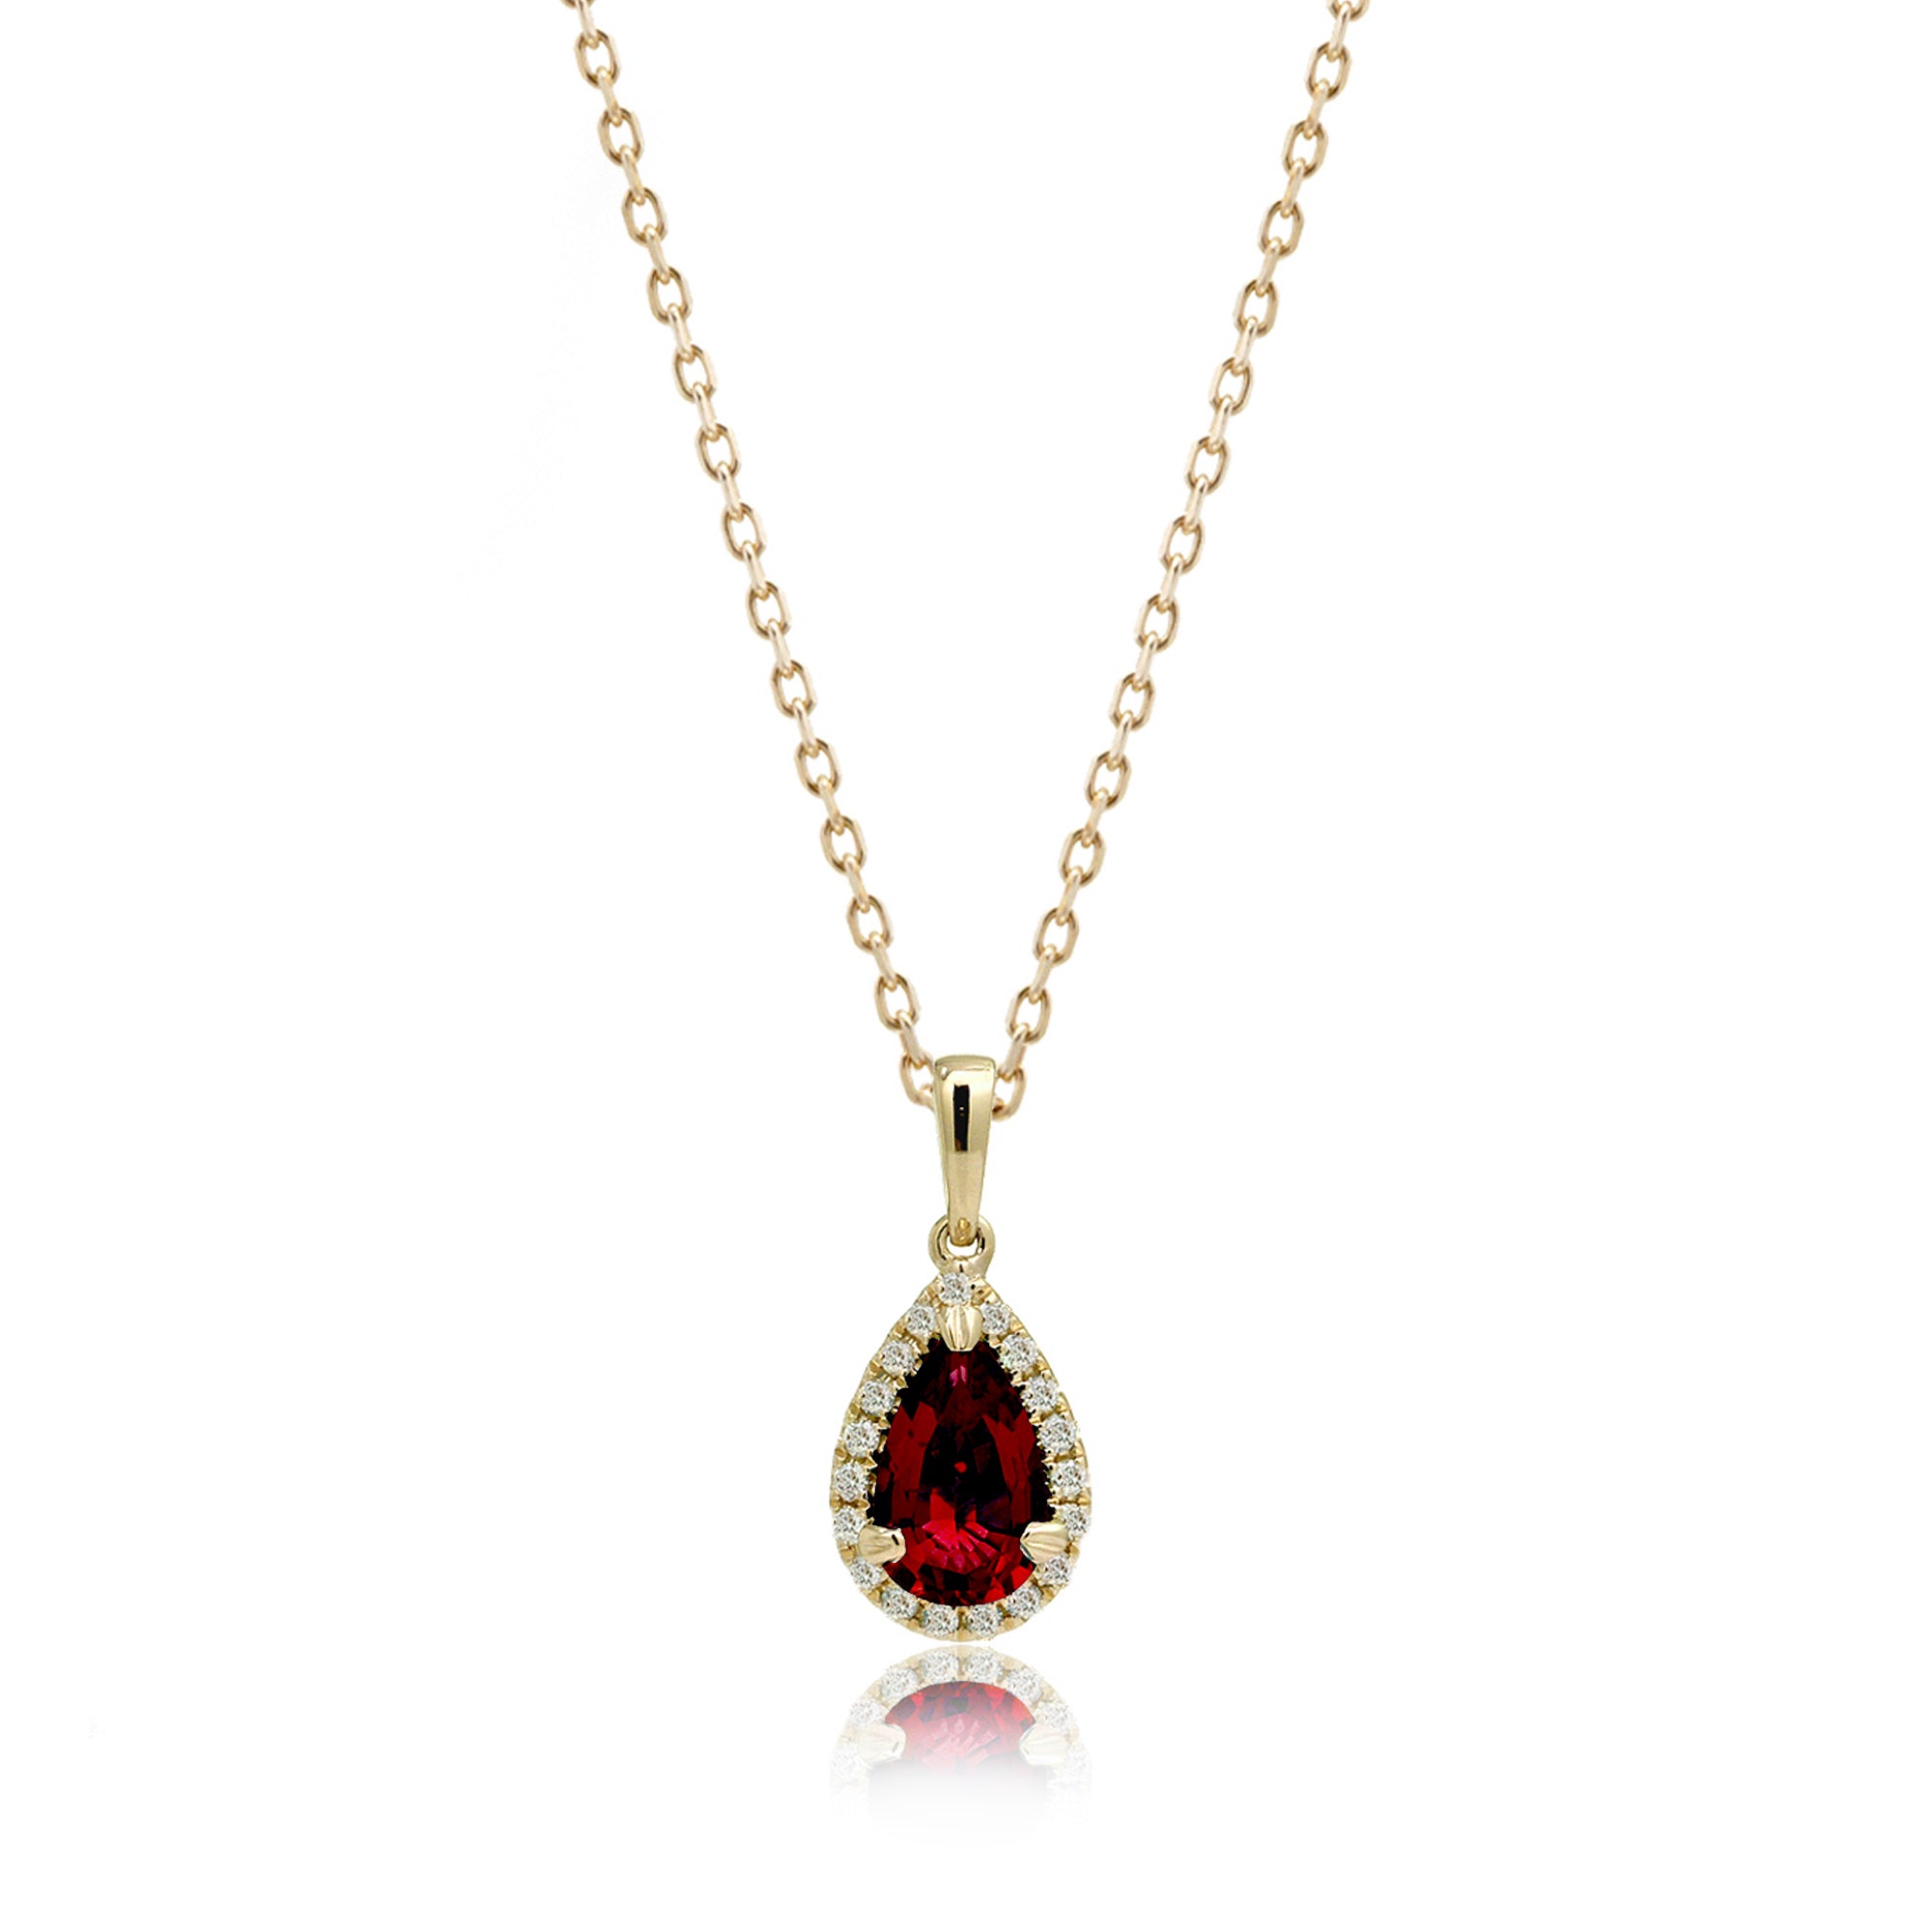 The Signature Pear Ruby Pendant (Lab-Grown)